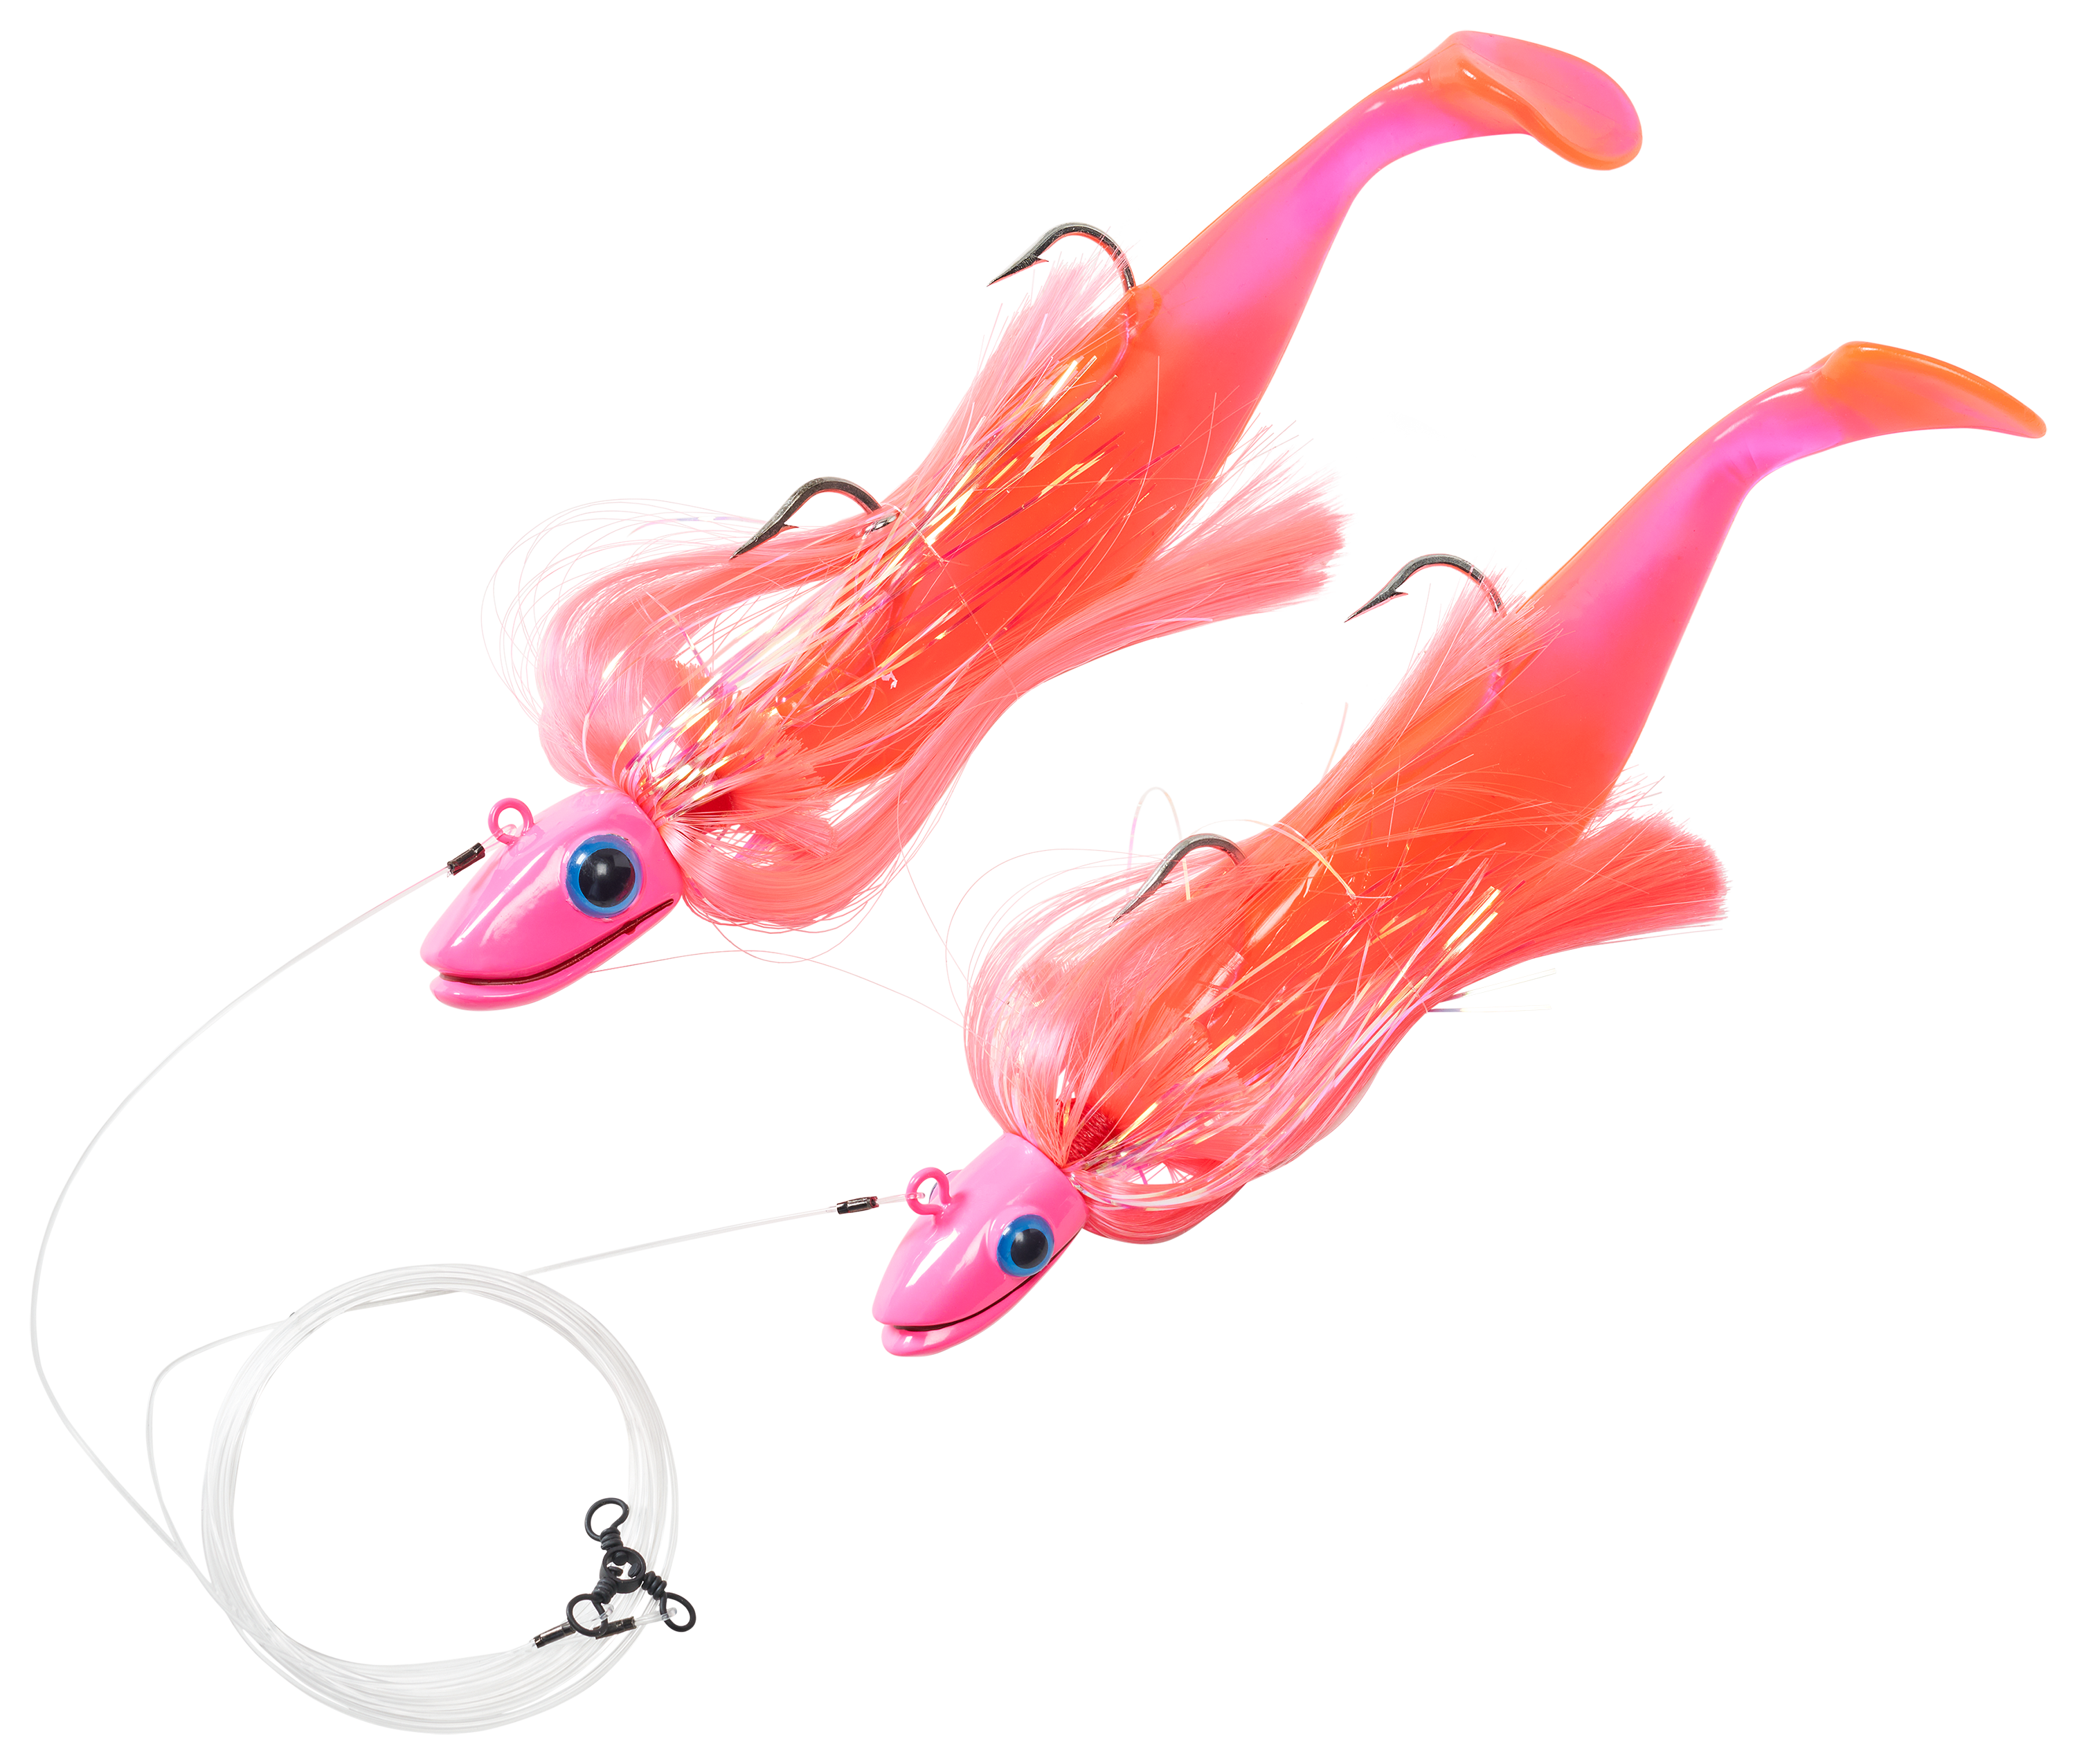 Blue Water Candy - Rock Fish Candy 8 oz & 4 oz Mojo Lure Loaded with 9-Inch  Swimbait Shad Bodies Tandem Parachute Rigged & Ready